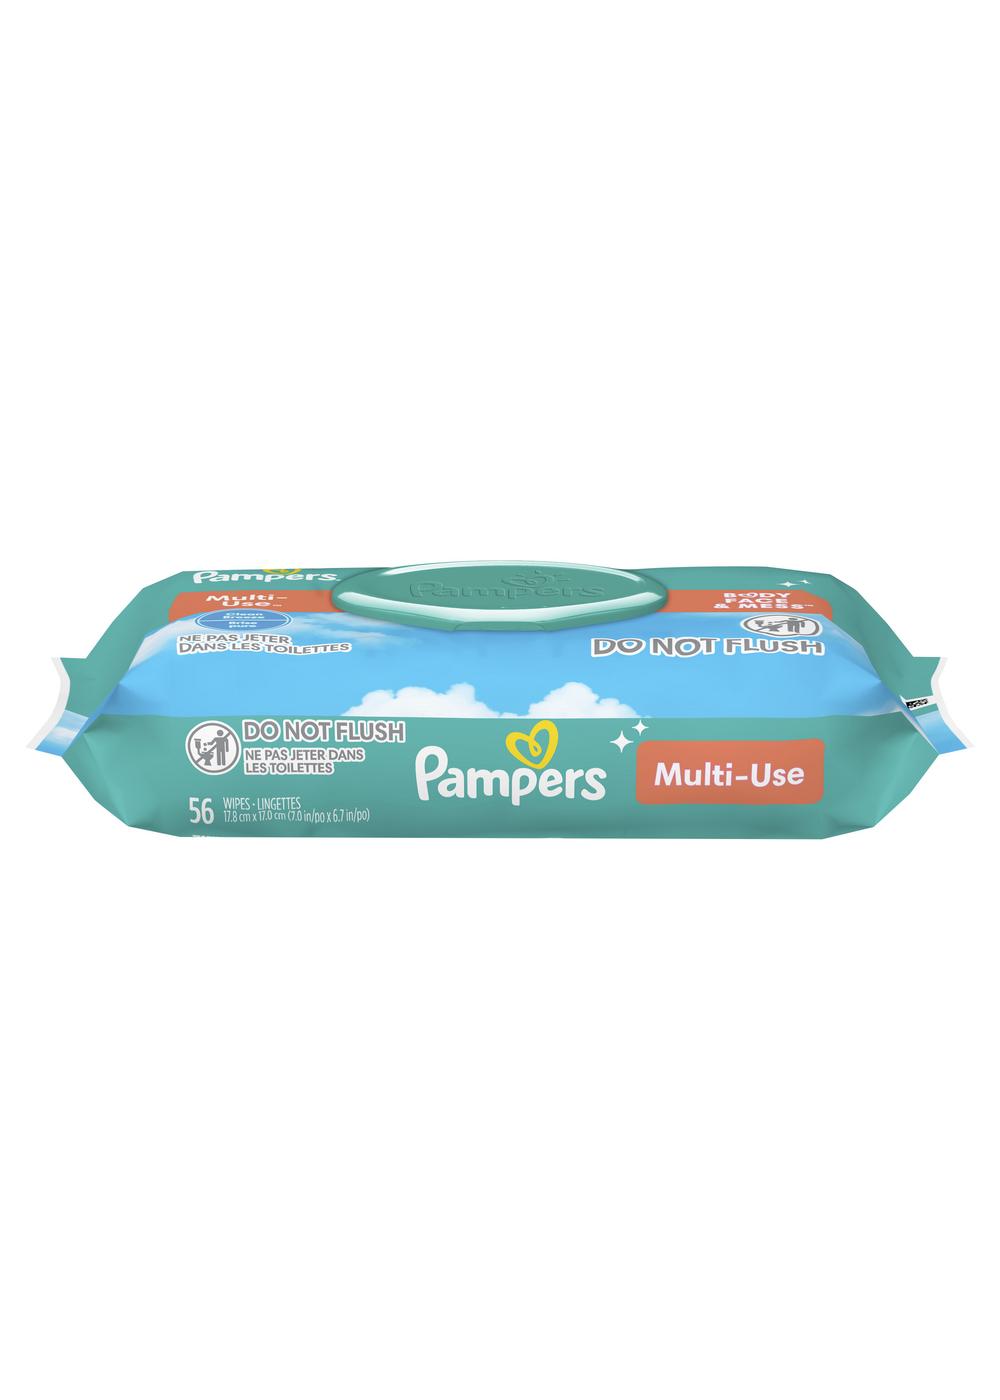 Pampers Multi-Use Clean Breeze Baby Wipes 3 Pk; image 7 of 8